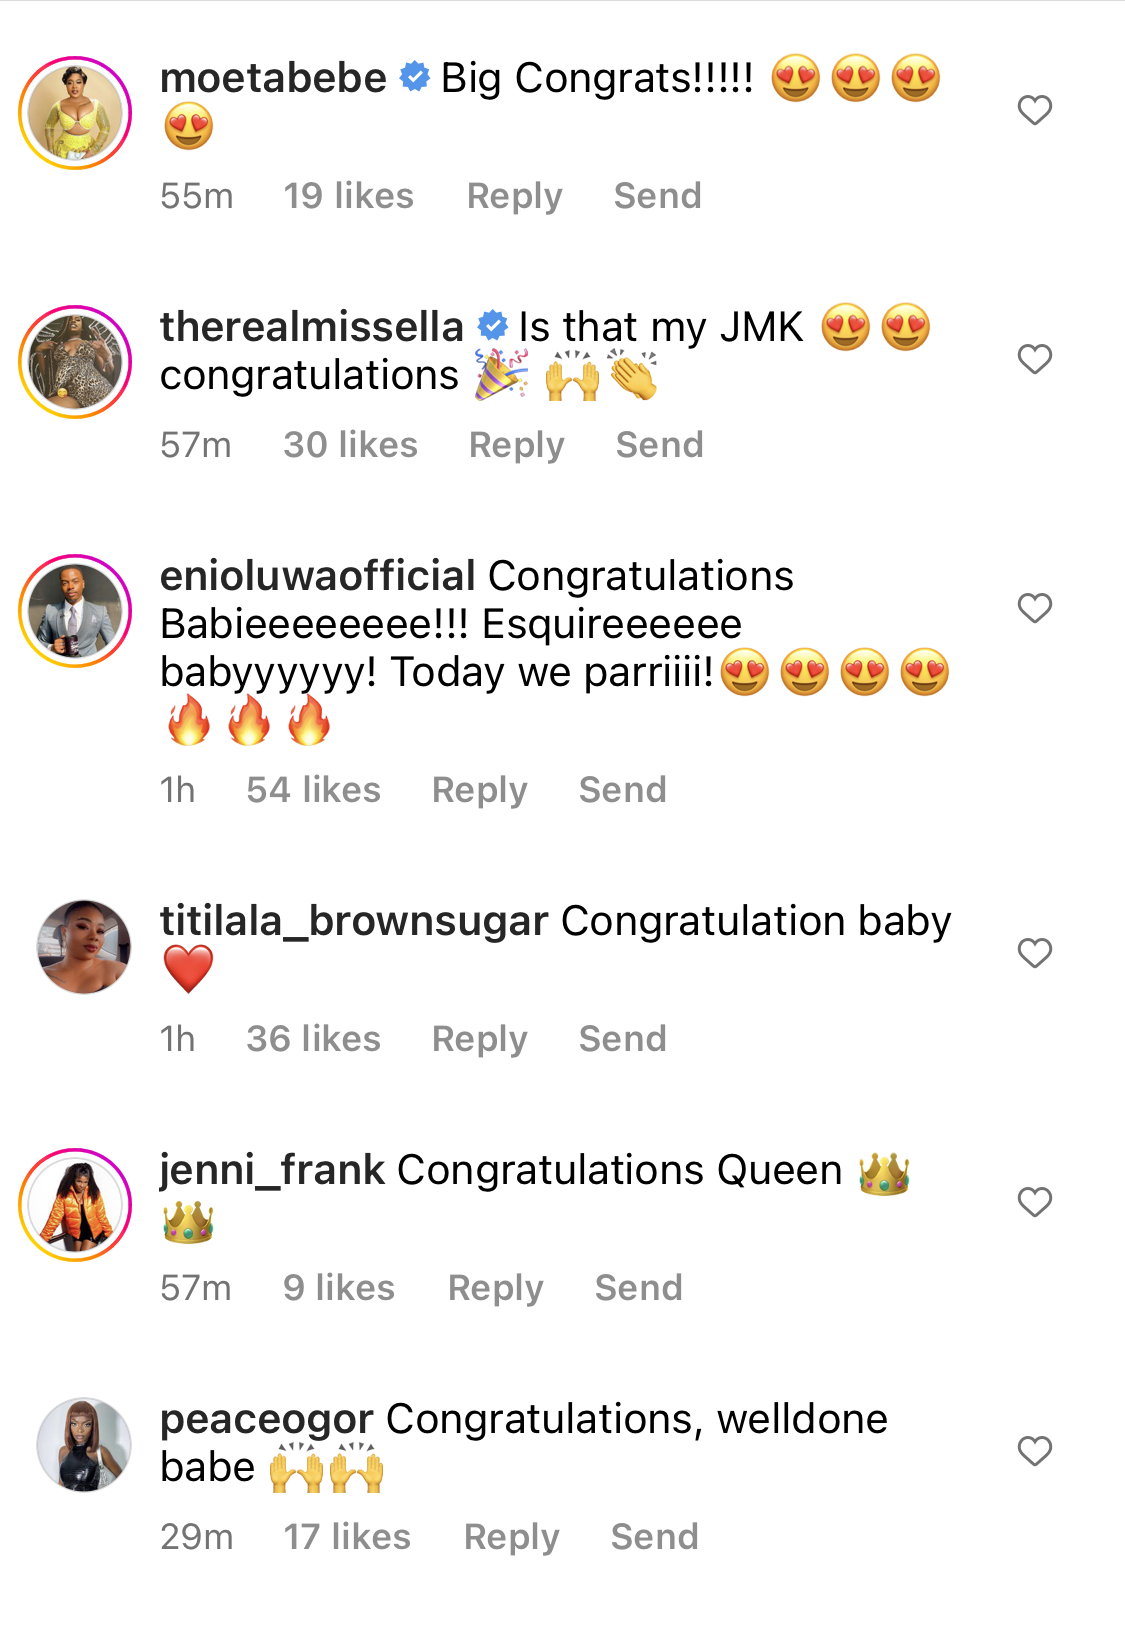 Ex-BBNaija Housemate JMK Officially becomes Lawyer as she gets called to bar [photos]